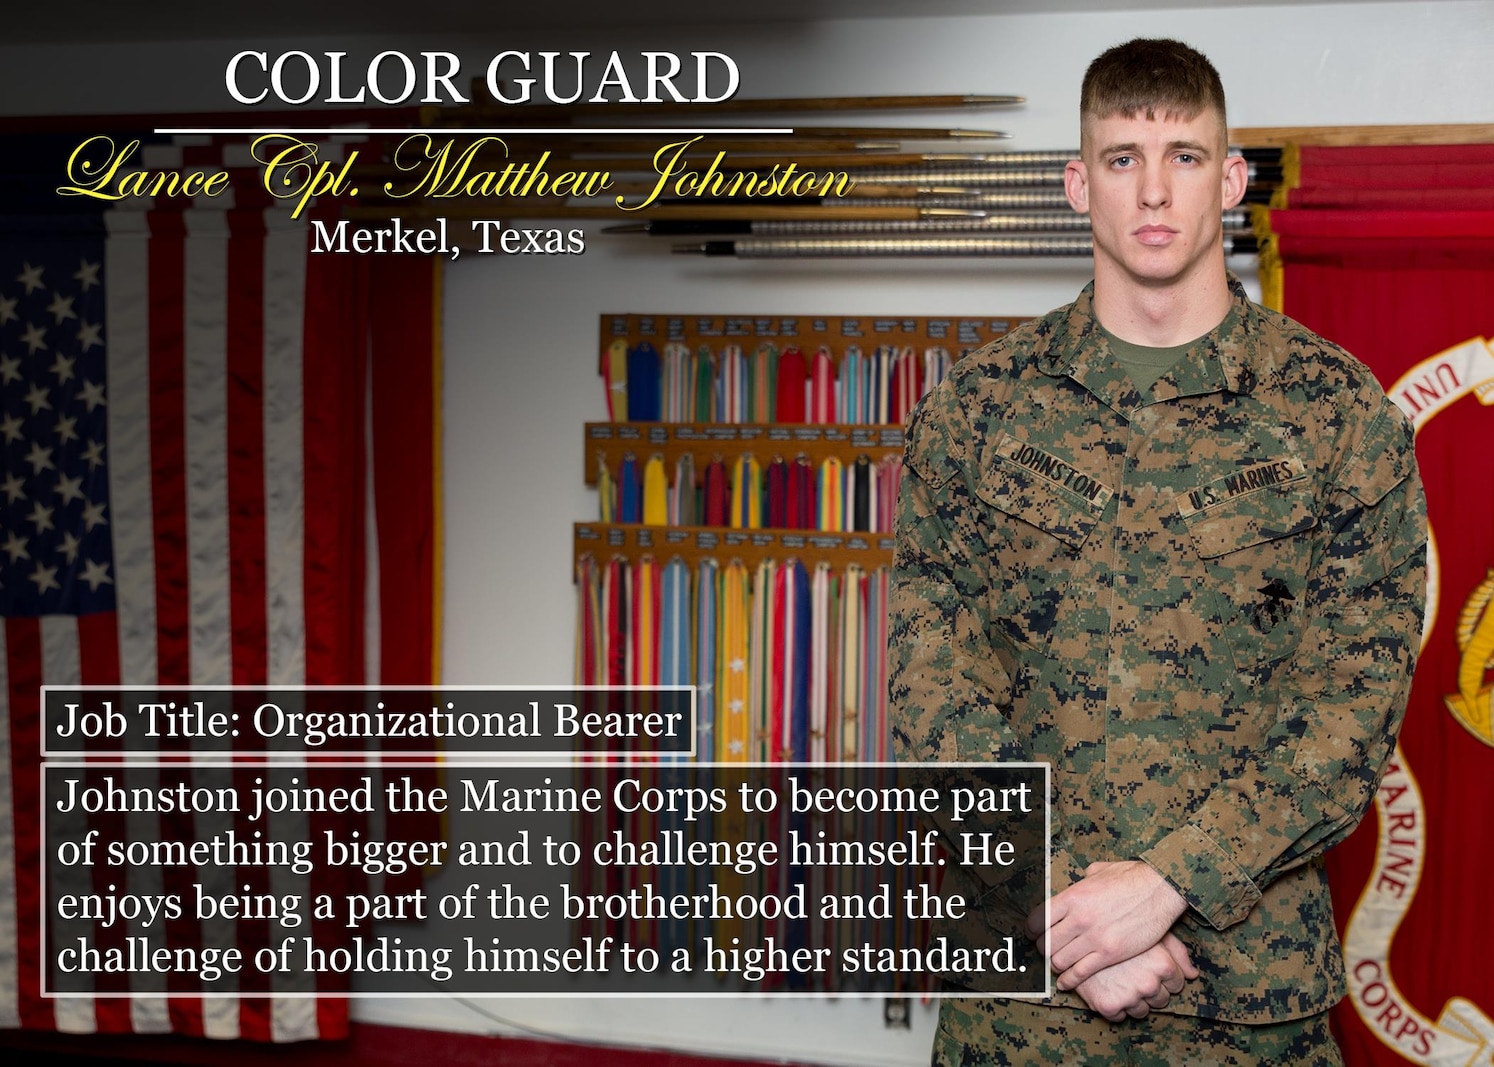 Lance Cpl. Matthew Johnston
Merkel, TexasMerkel, Texas
Job Title: Organizational Bearer
Johnston joined the Marine Corps to become part of something bigger and to challenge himself. He enjoys being a part of the brotherhood and the challenge of holding himself to a higher standard.
(Official Marine Corps graphic by Cpl. Chi Nguyen/Released)